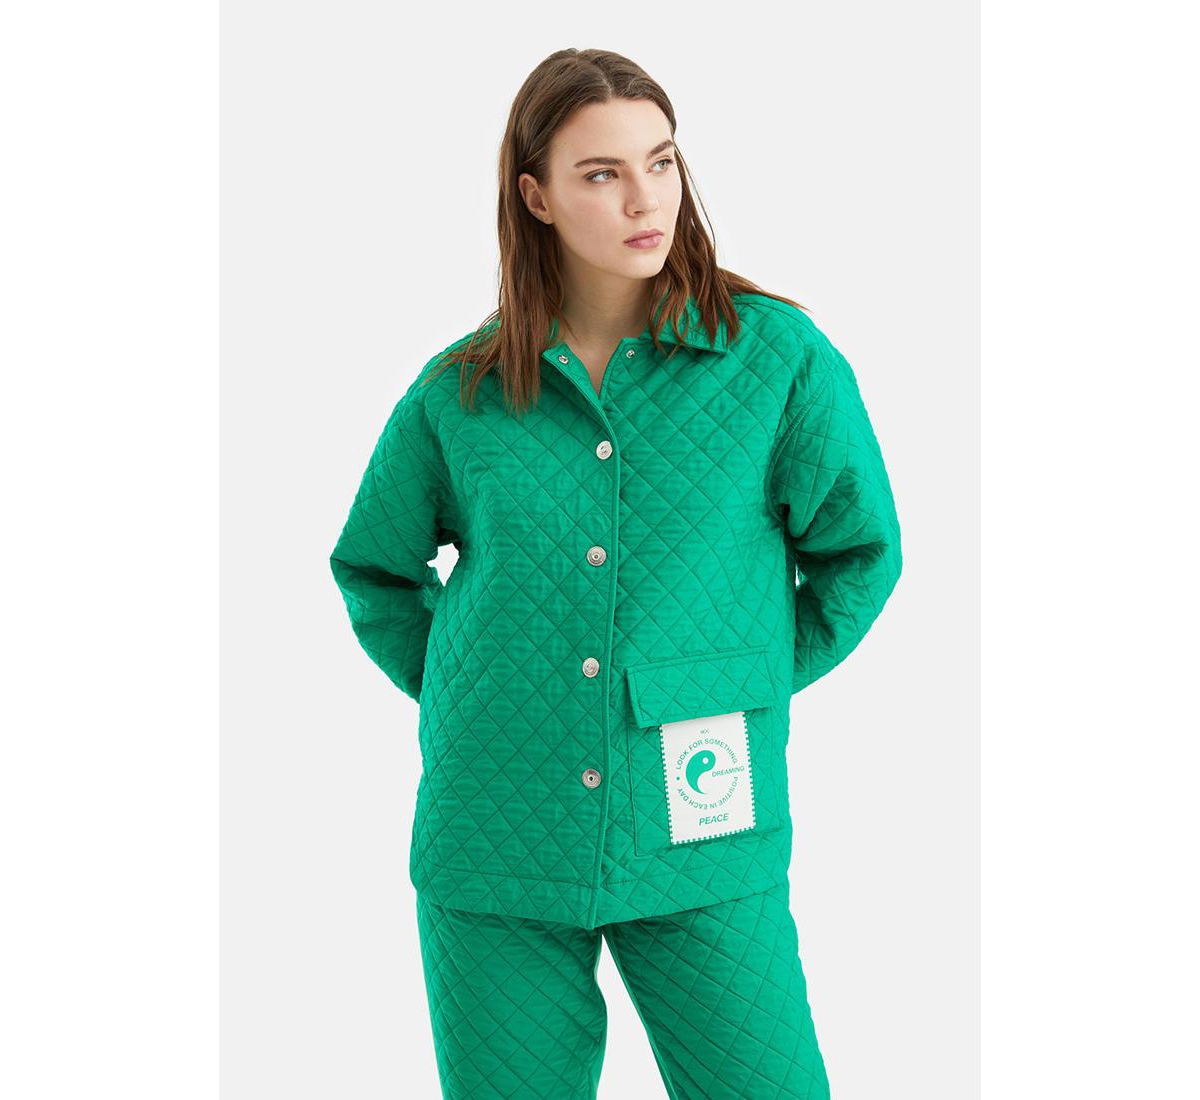 Women's Over d Quilted Jacket - Green